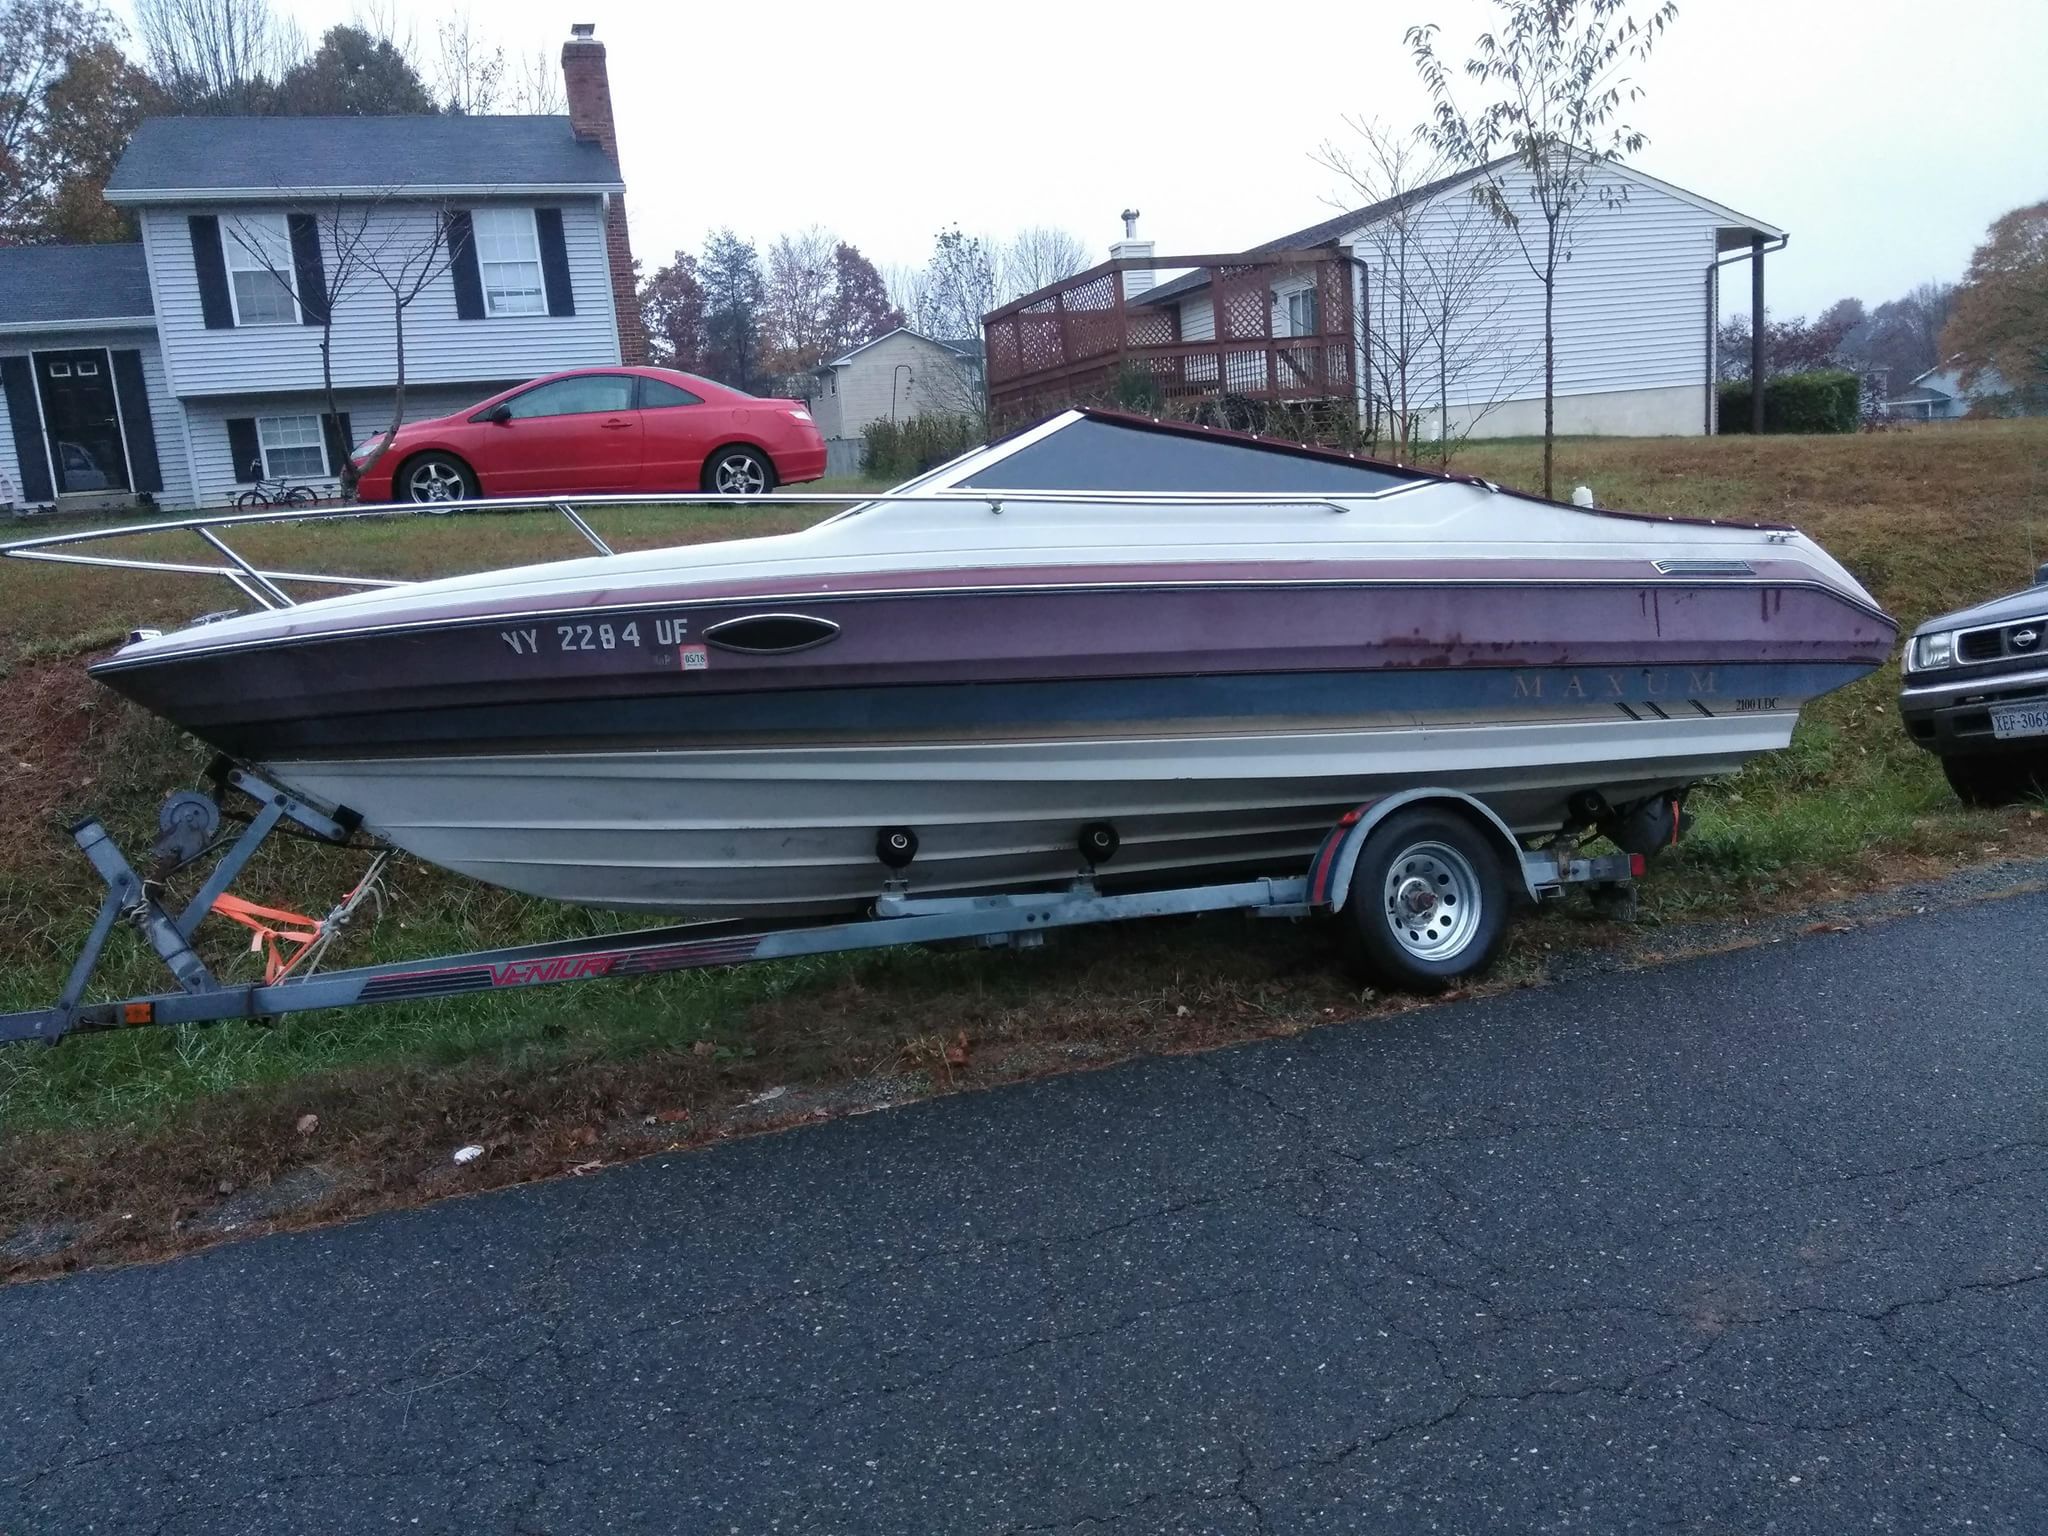 Boat good condition